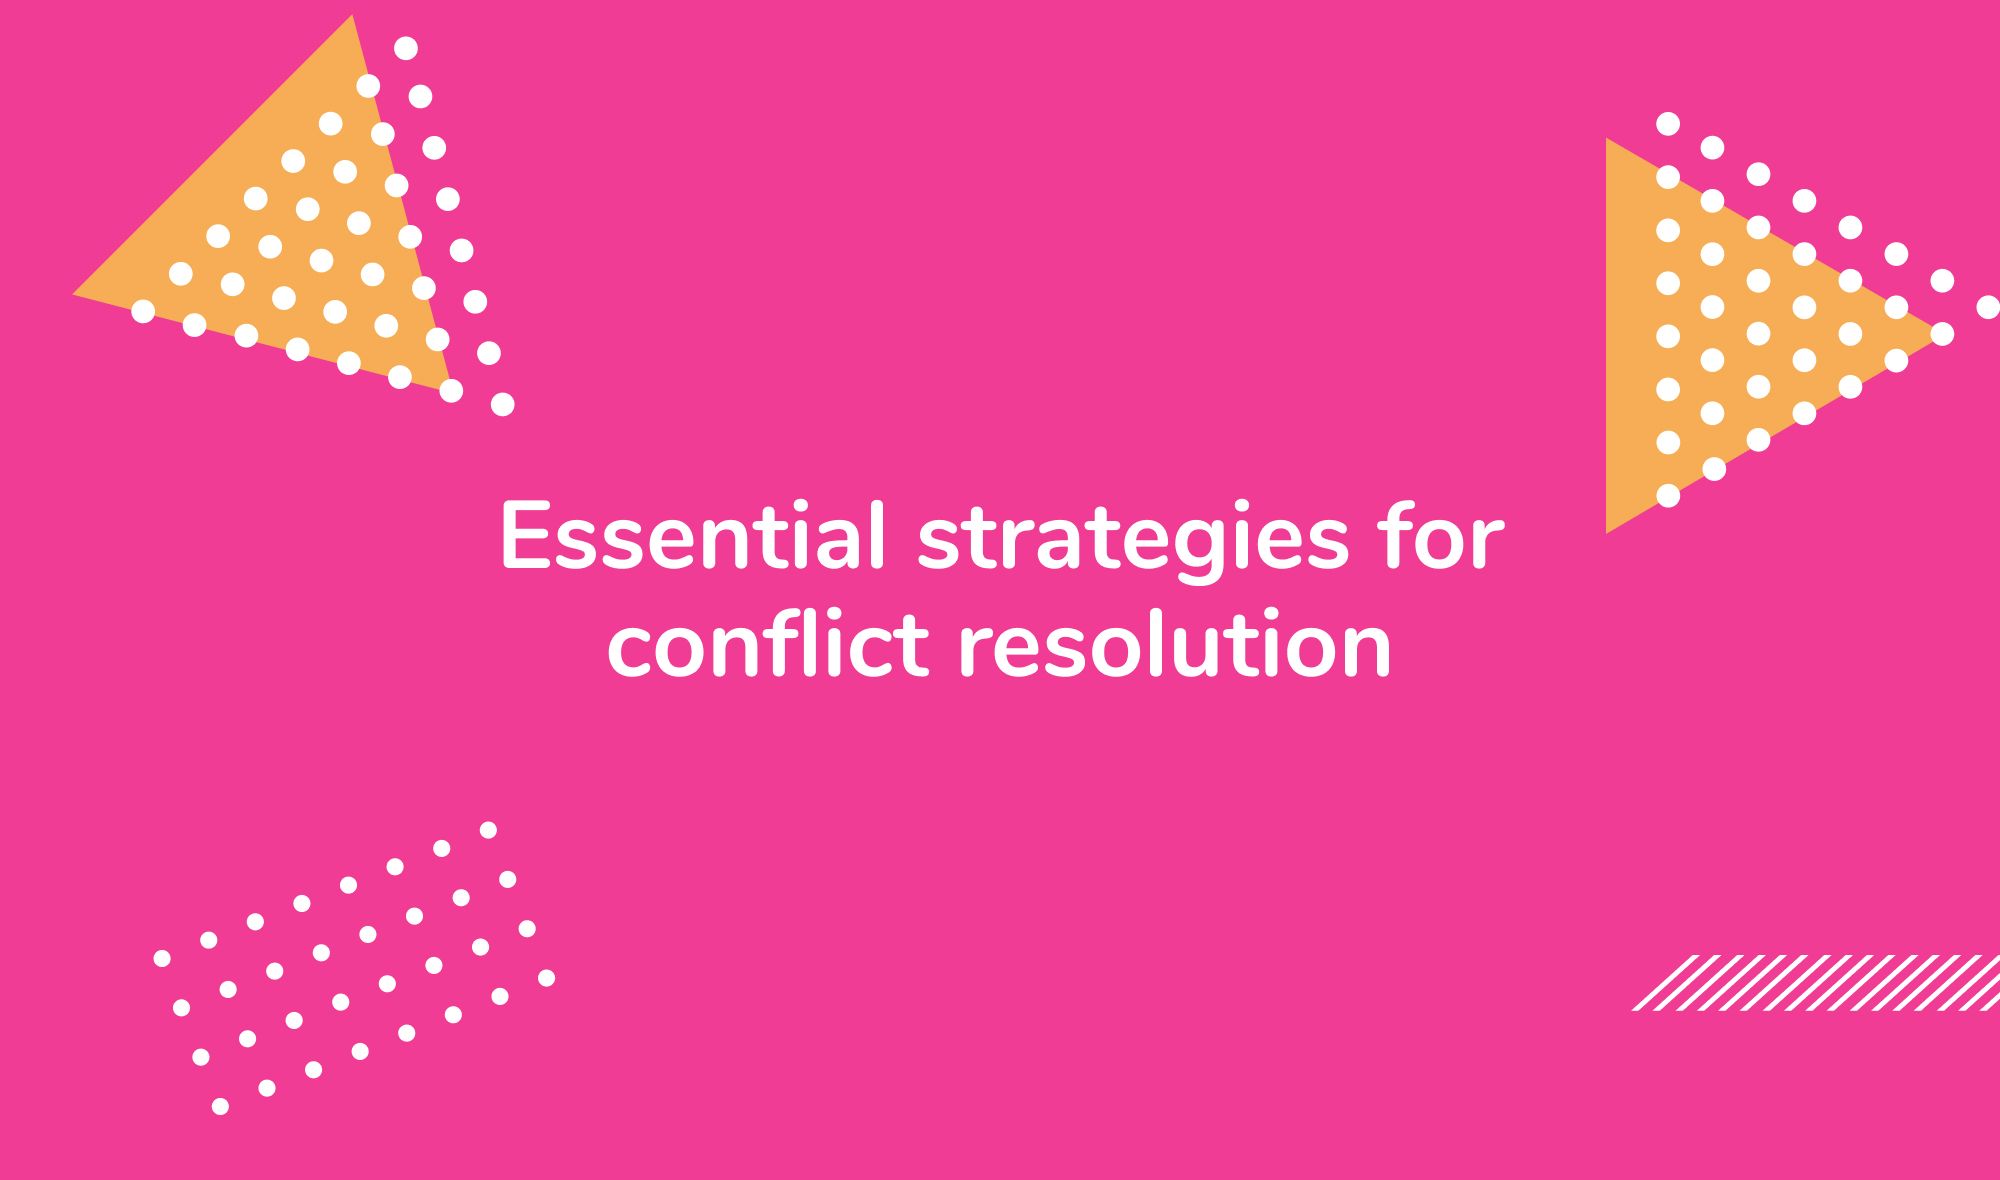 Essential strategies for conflict resolution